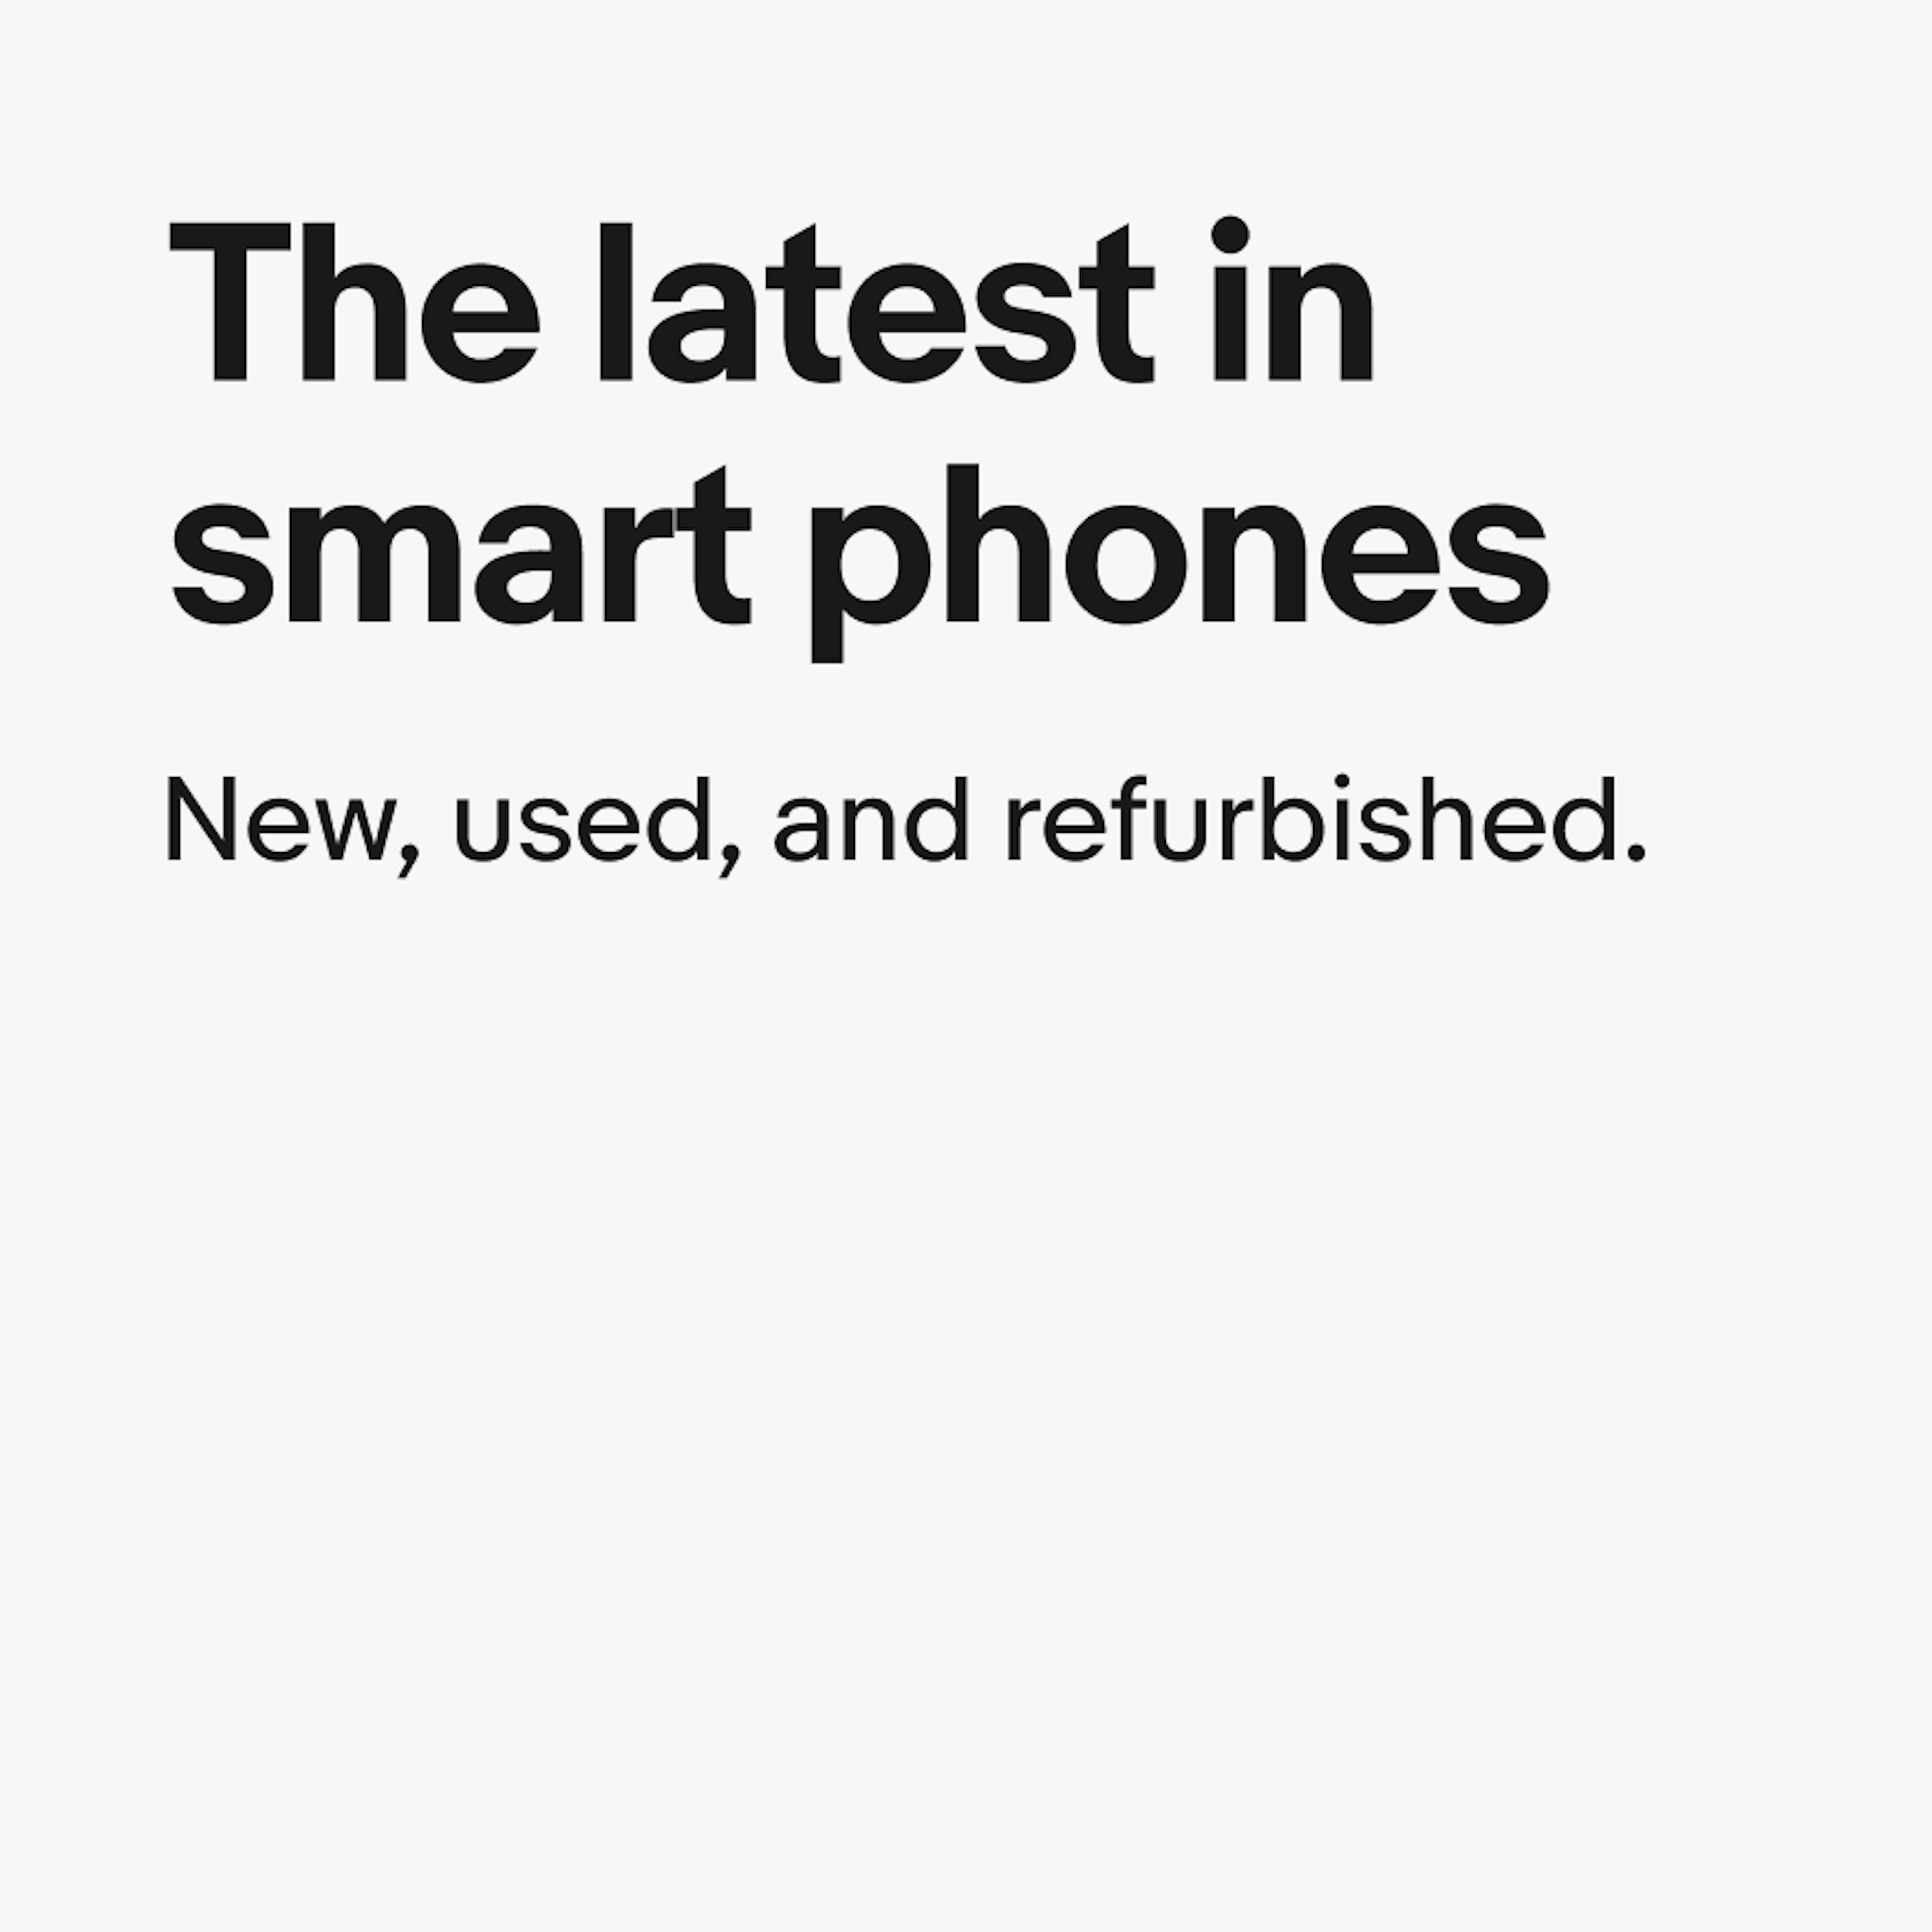 A type-based ad for smart phones. The headline is in bold weight, while the subtitle is in regular weight and is much smaller than the headline.